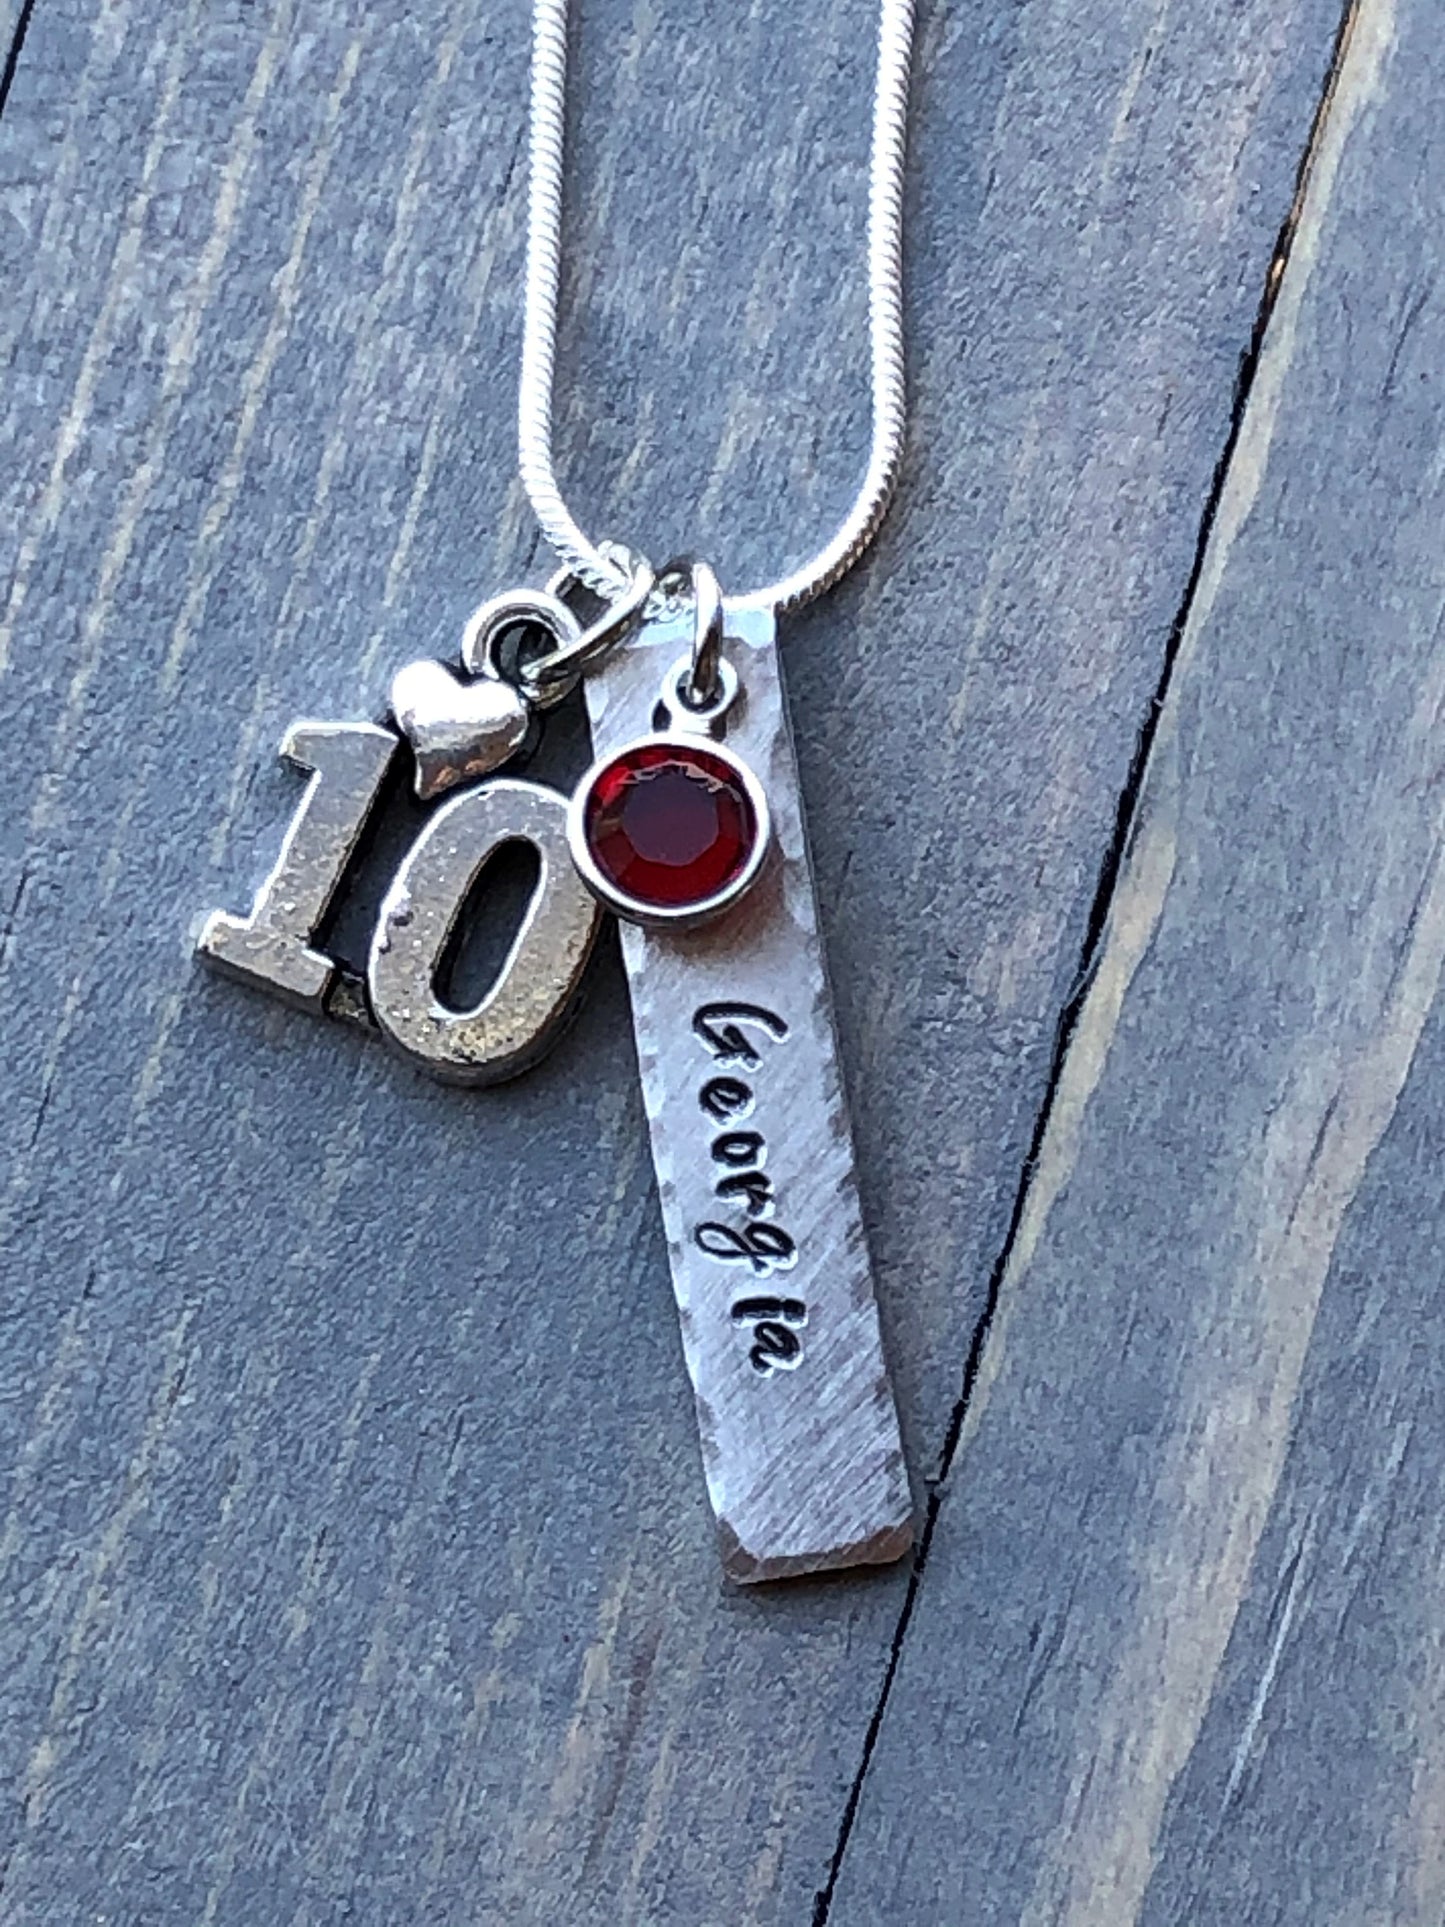 10th Birthday Necklace, Gift for Girl, Personalized Necklace, Birthstone Necklace, Gift for Girl&#39;s 10th birday, Turning 10, Add a Charm